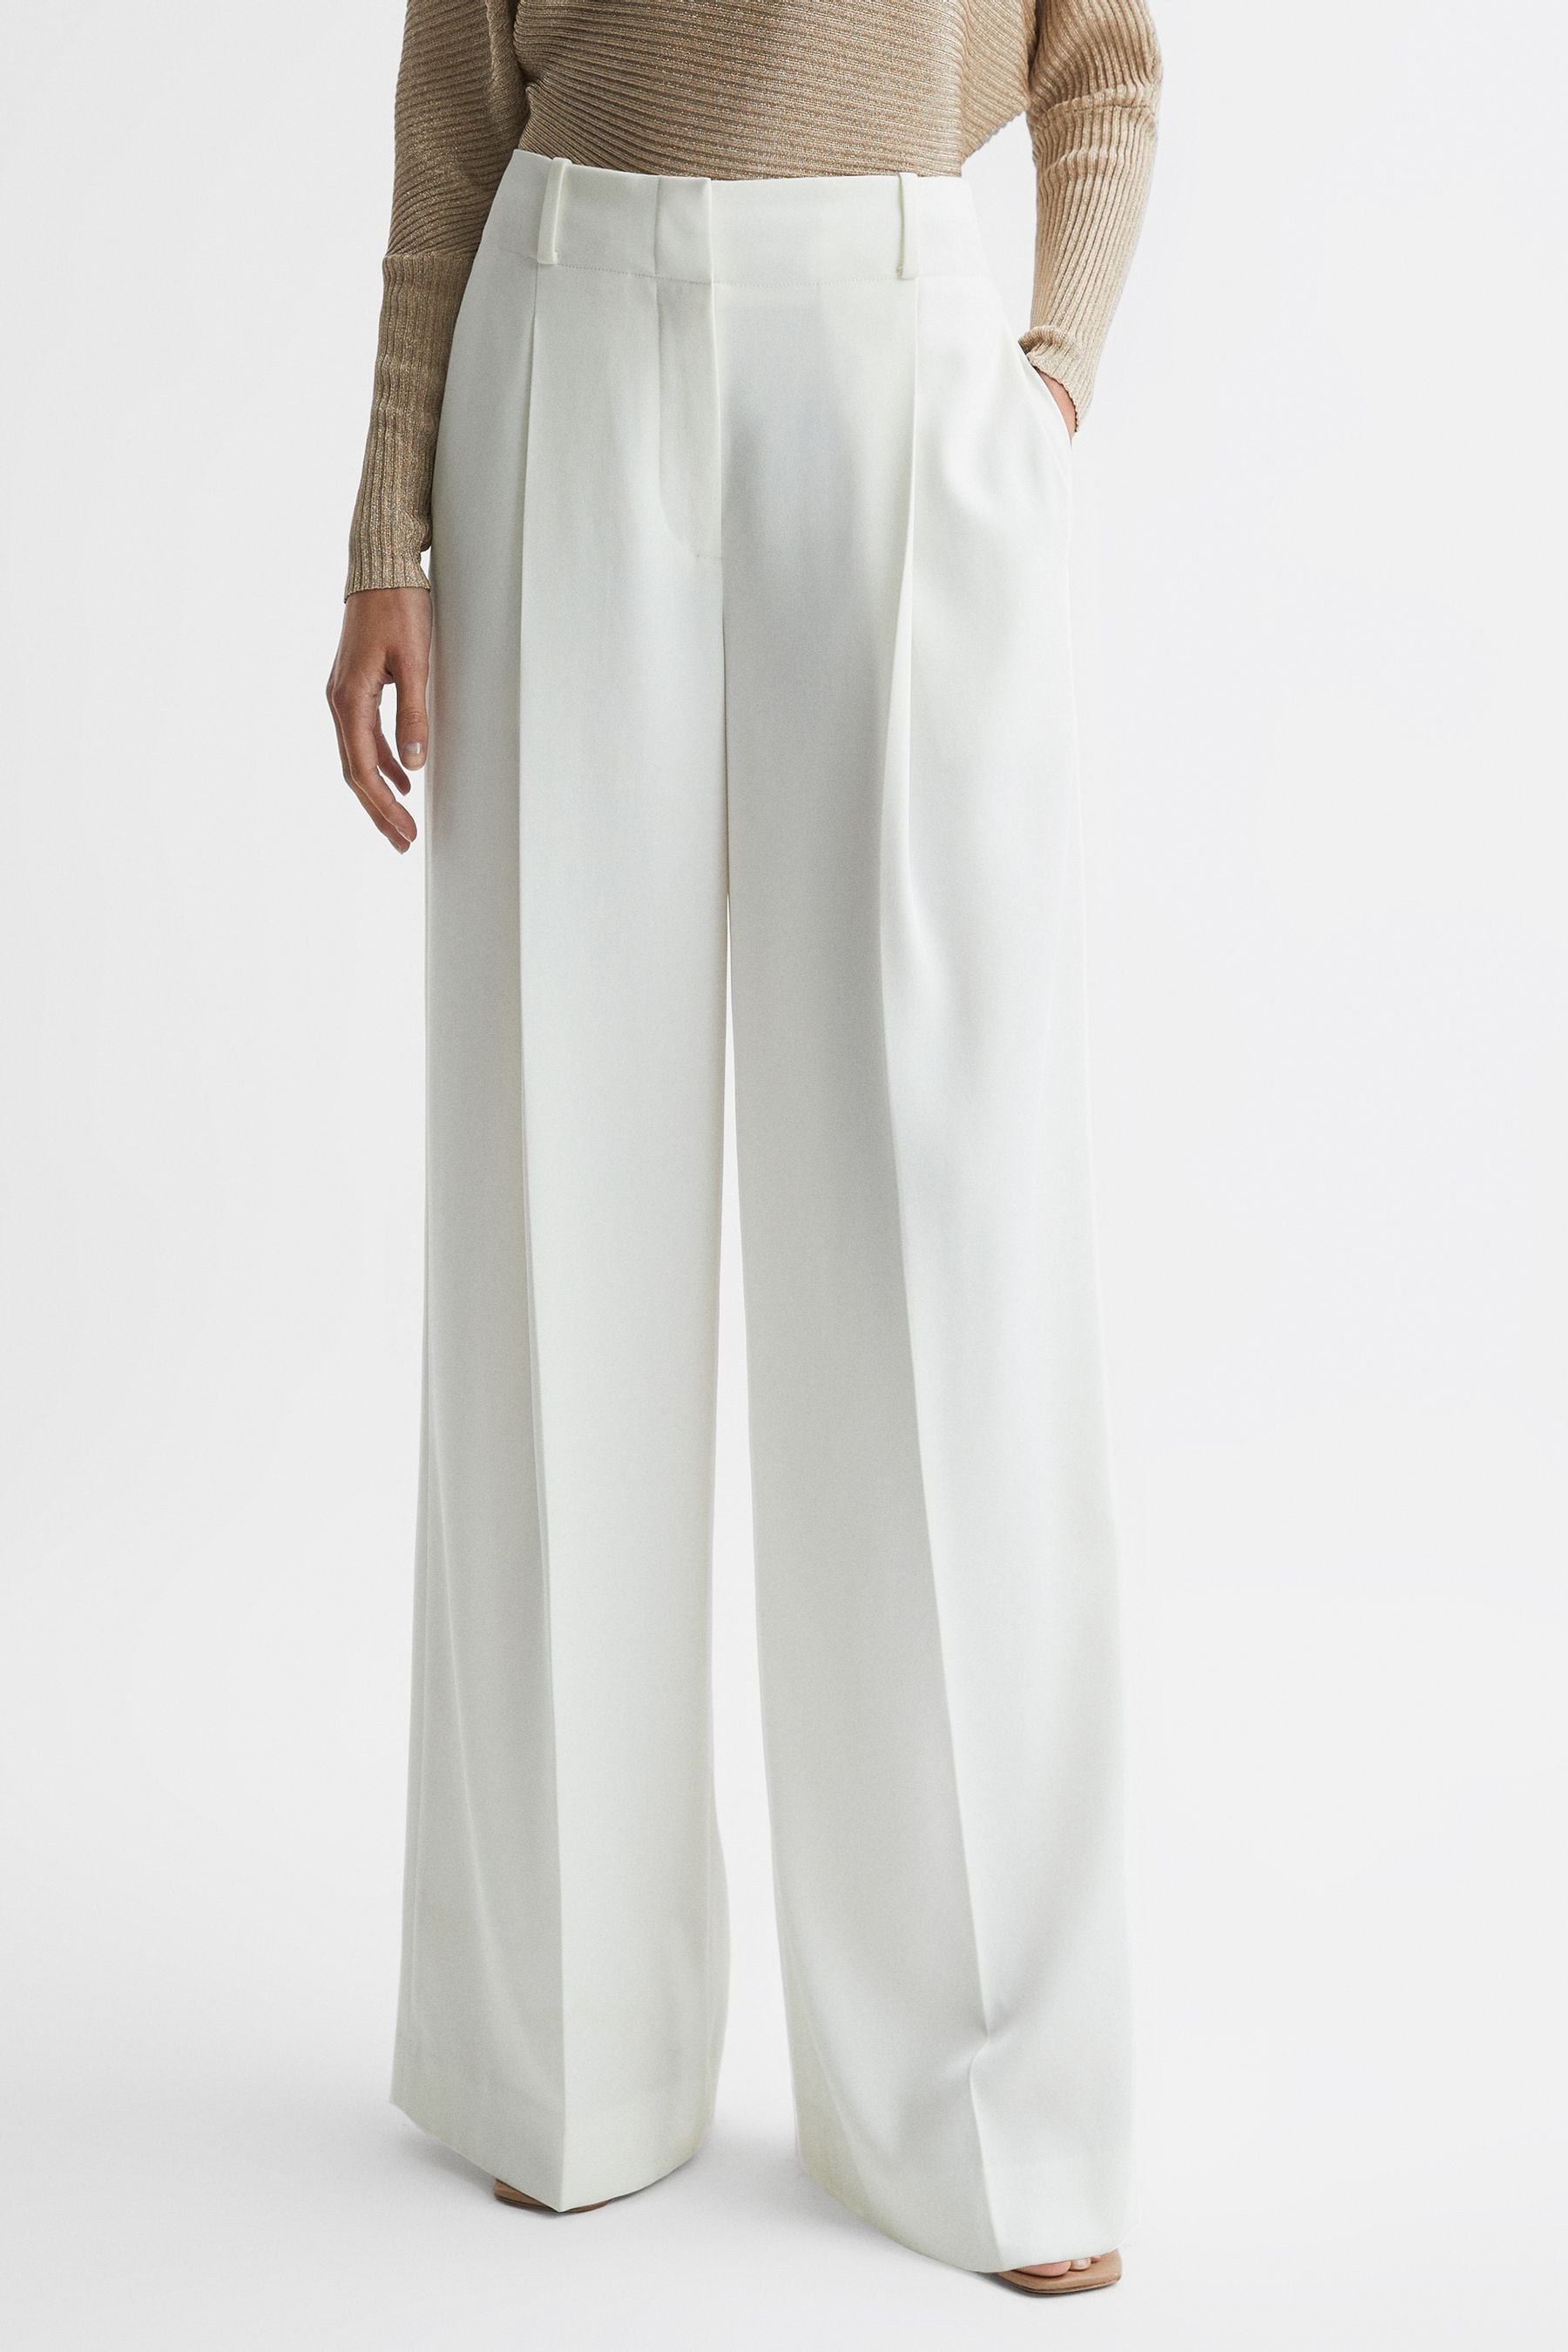 Reiss Lillie - White Mid Rise Wide Leg Trousers, Us 6